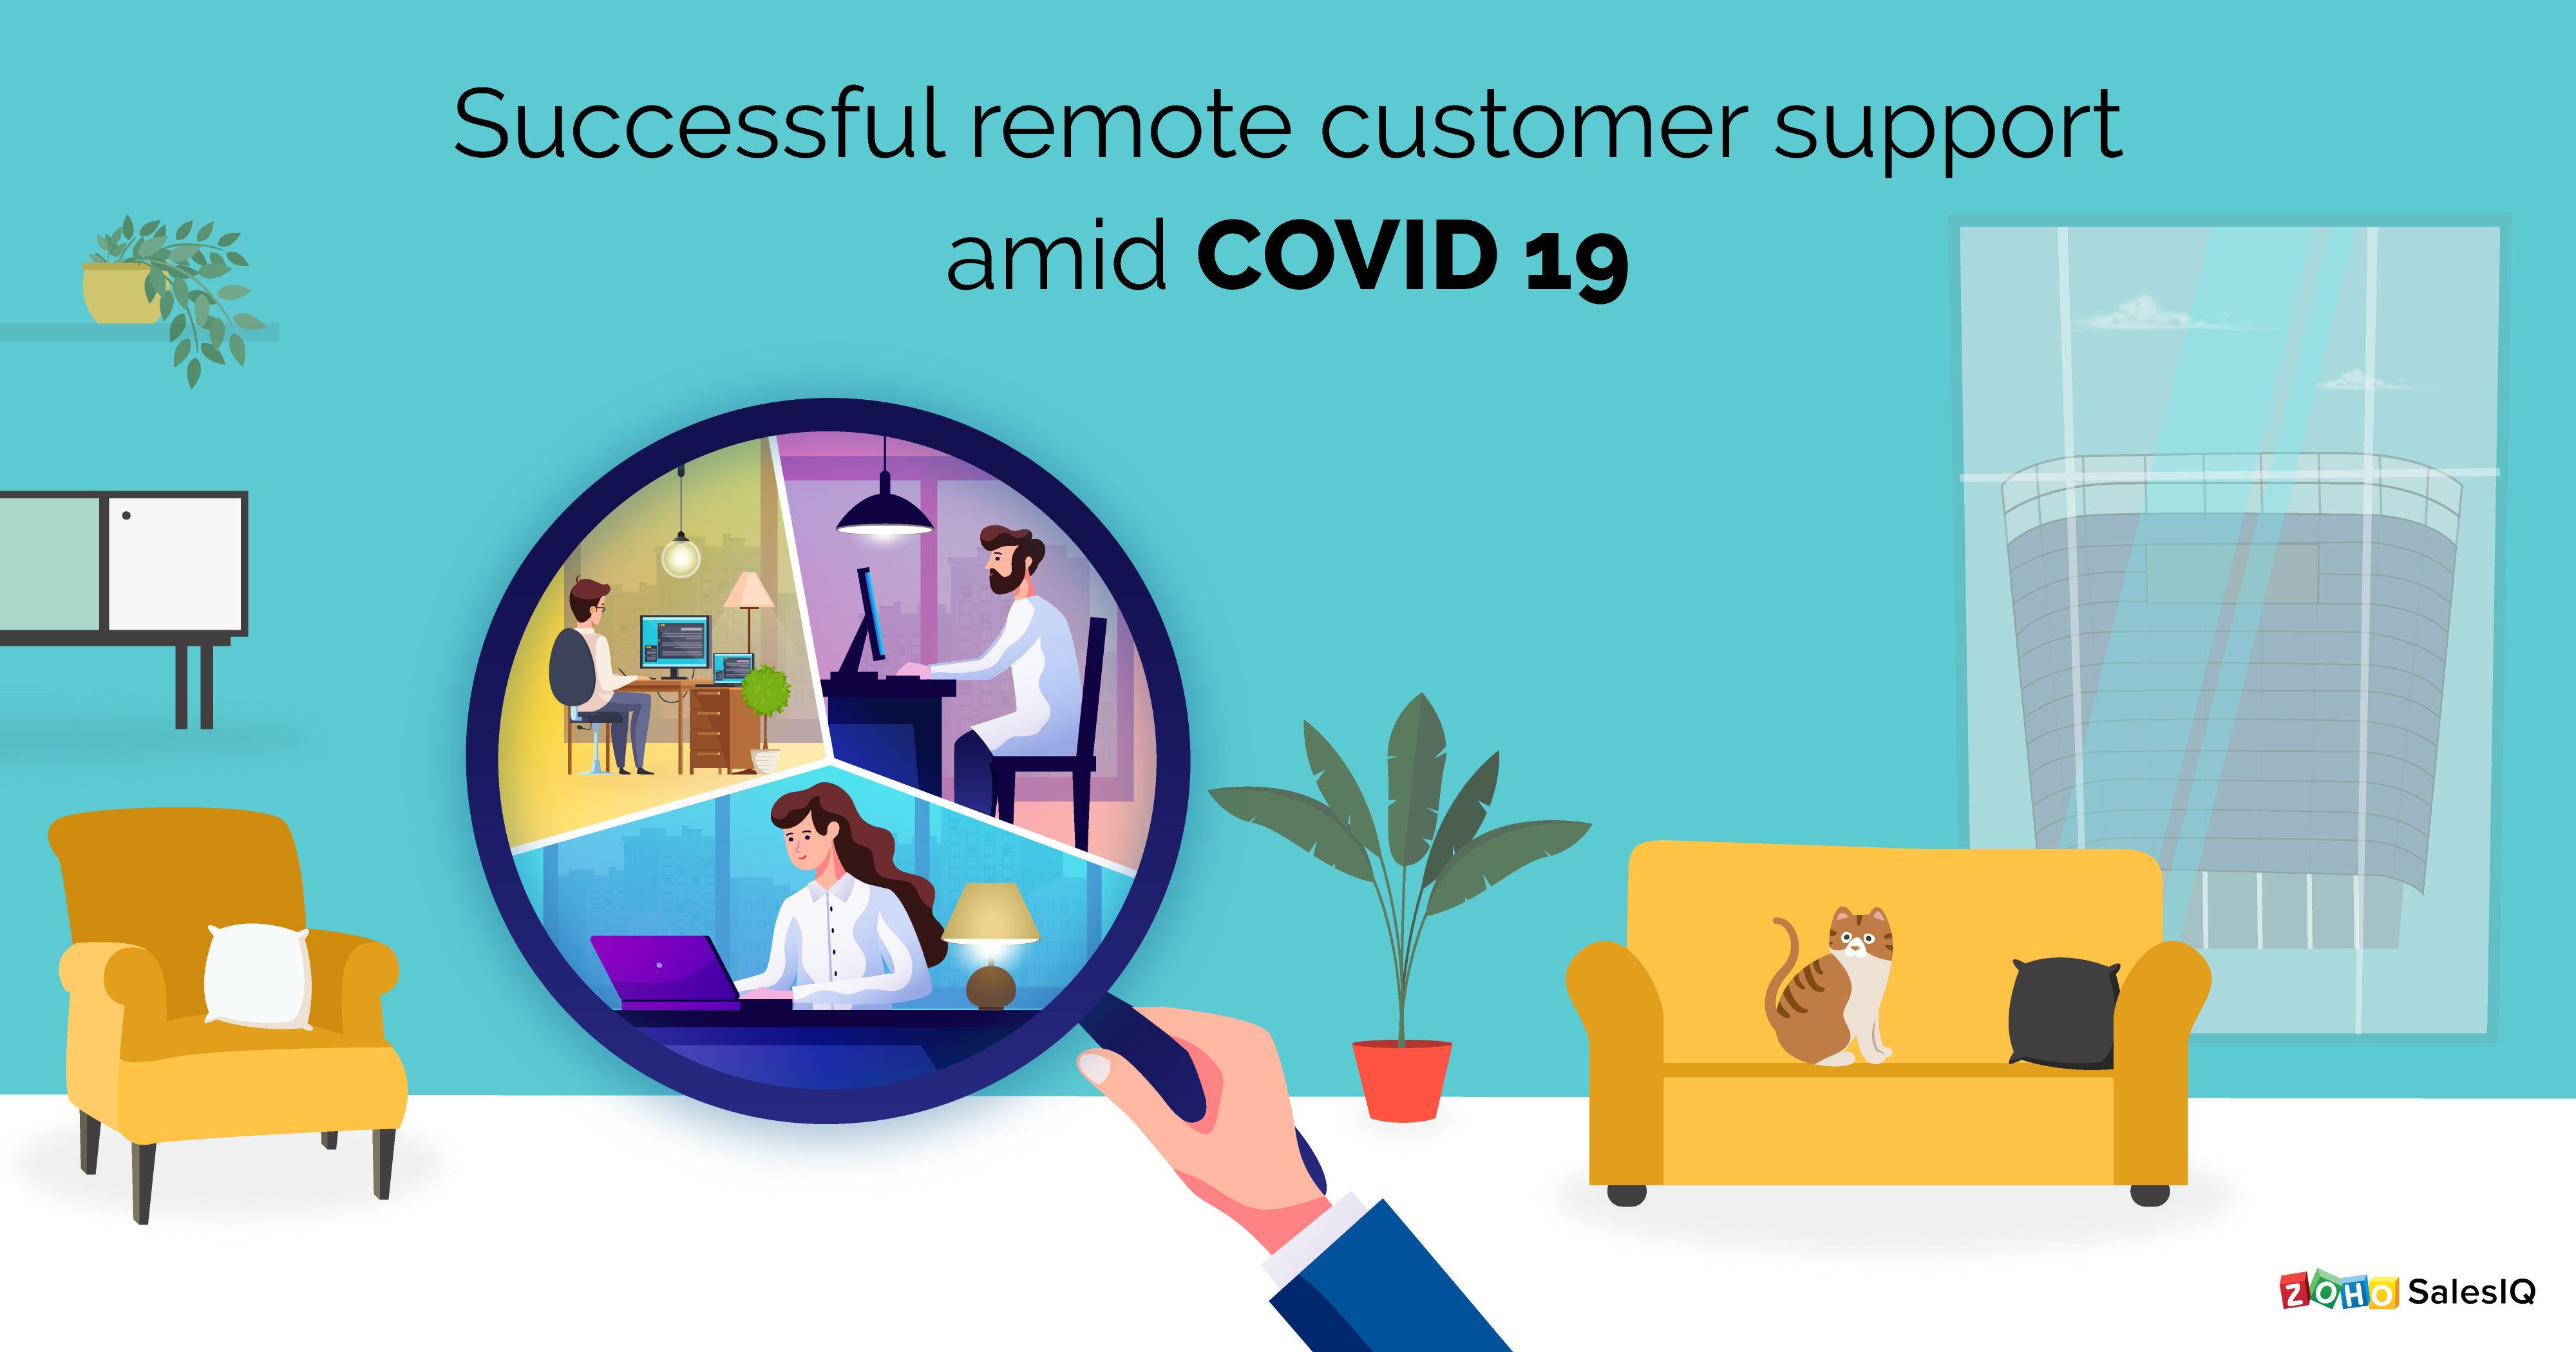 Customer service amid COVID 19: A guide to managing remote customer support teams